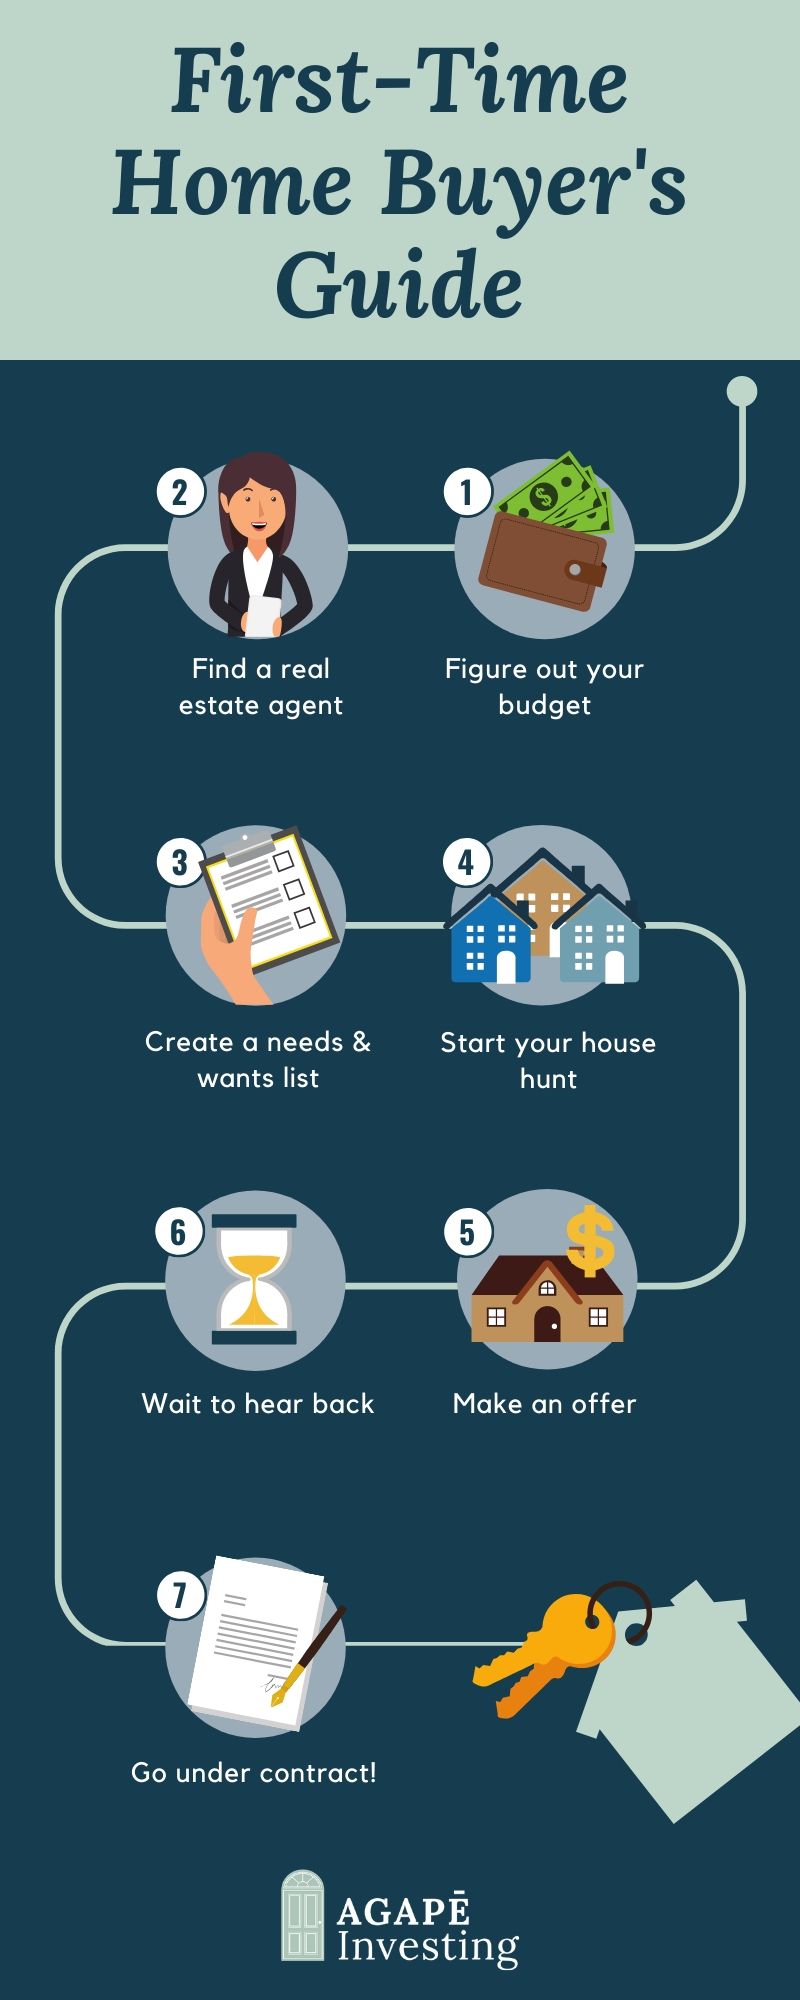 The Process of Buying a Home. Buying a home is such an exciting time, but for first time home buyers, it can be a lot to take in. This First Time Home Buyer’s Guide is here to help you navigate the process of buying a house. #firsttimehomebuyer #howtobuyahome #homebuyingprocess #homebuyertips #homebuyersguide